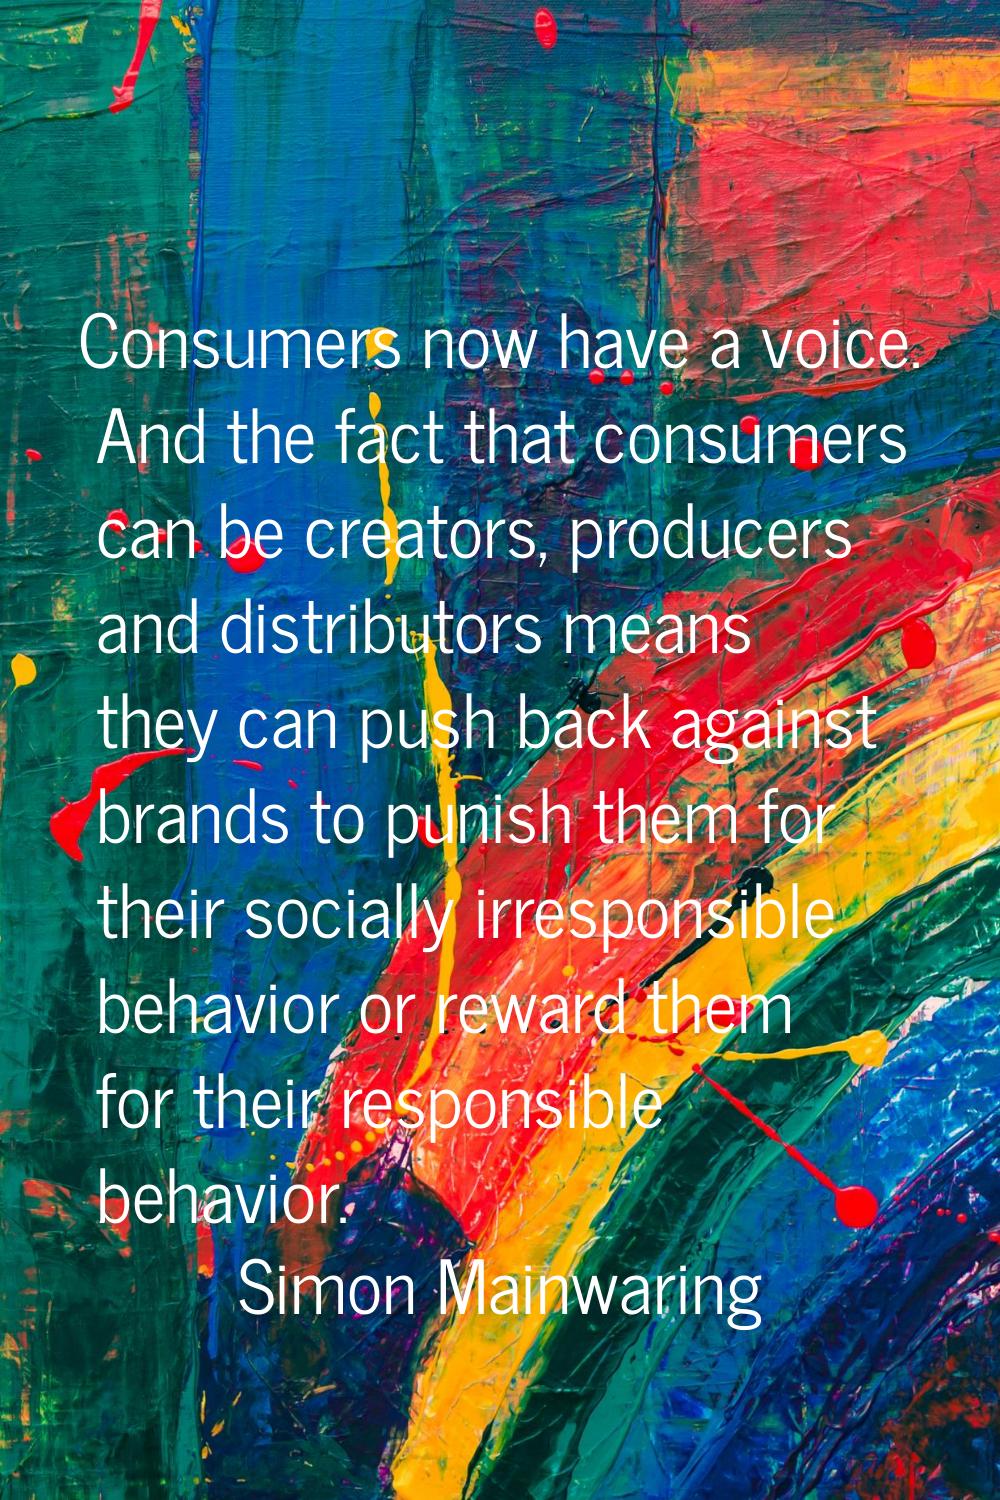 Consumers now have a voice. And the fact that consumers can be creators, producers and distributors